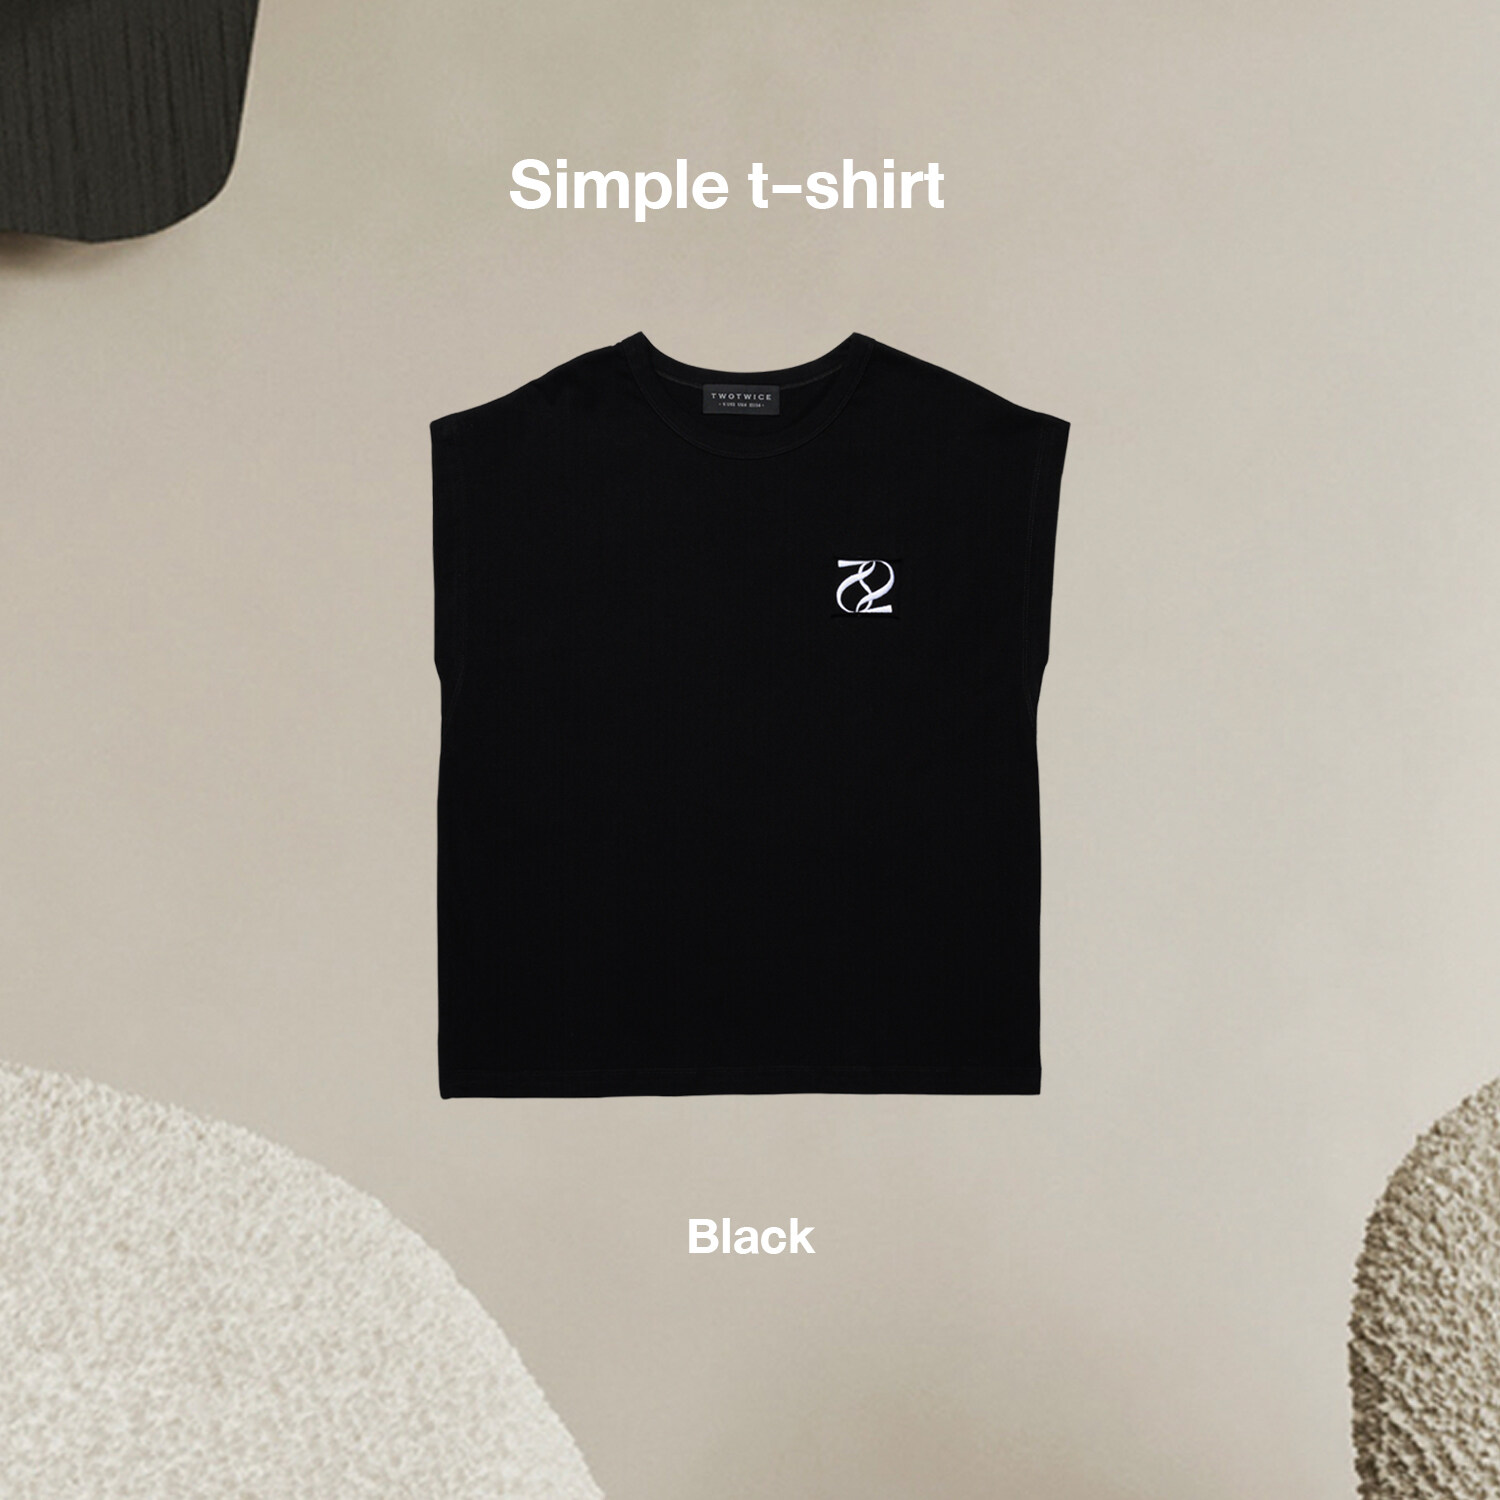 Twotwice - Simple t-shirt